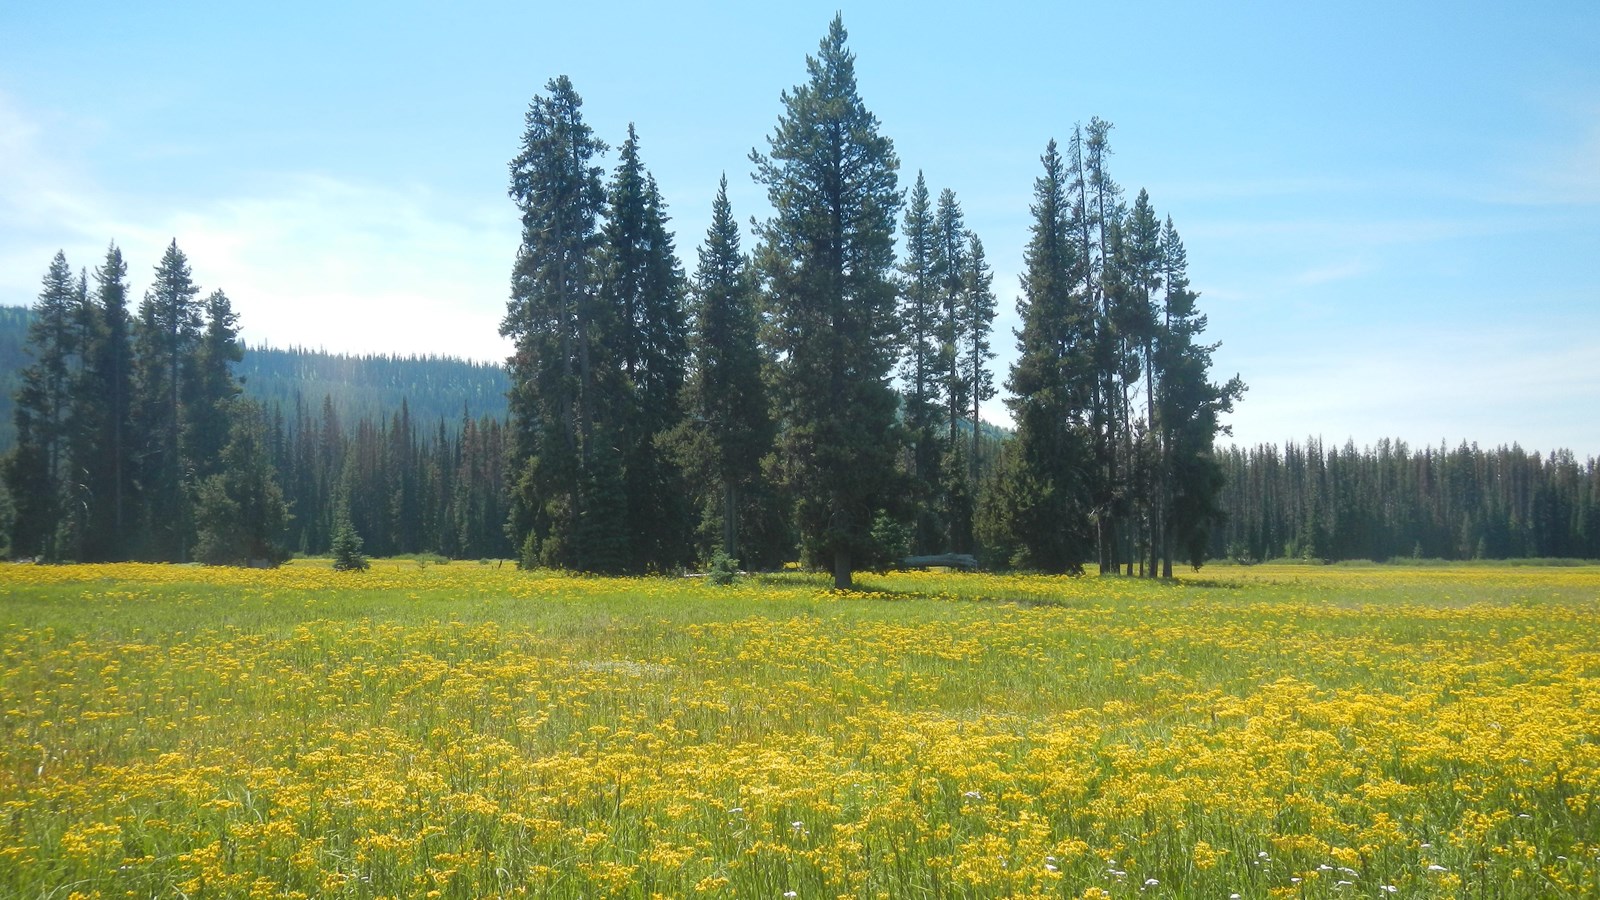 large grassy field covered in yellow flowers